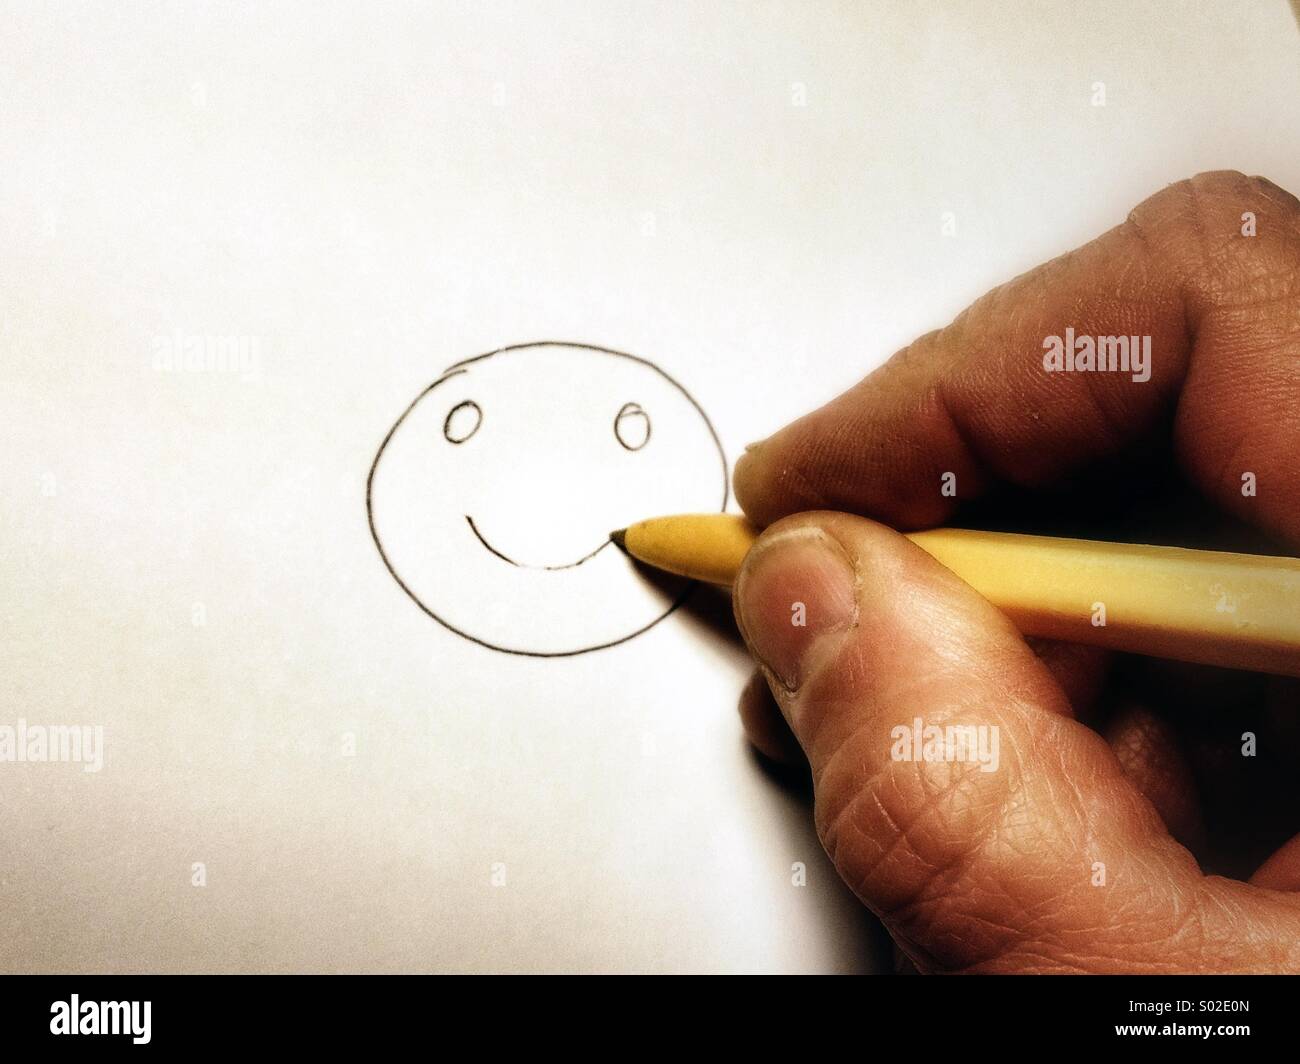 Drawing smiley face Stock Photo